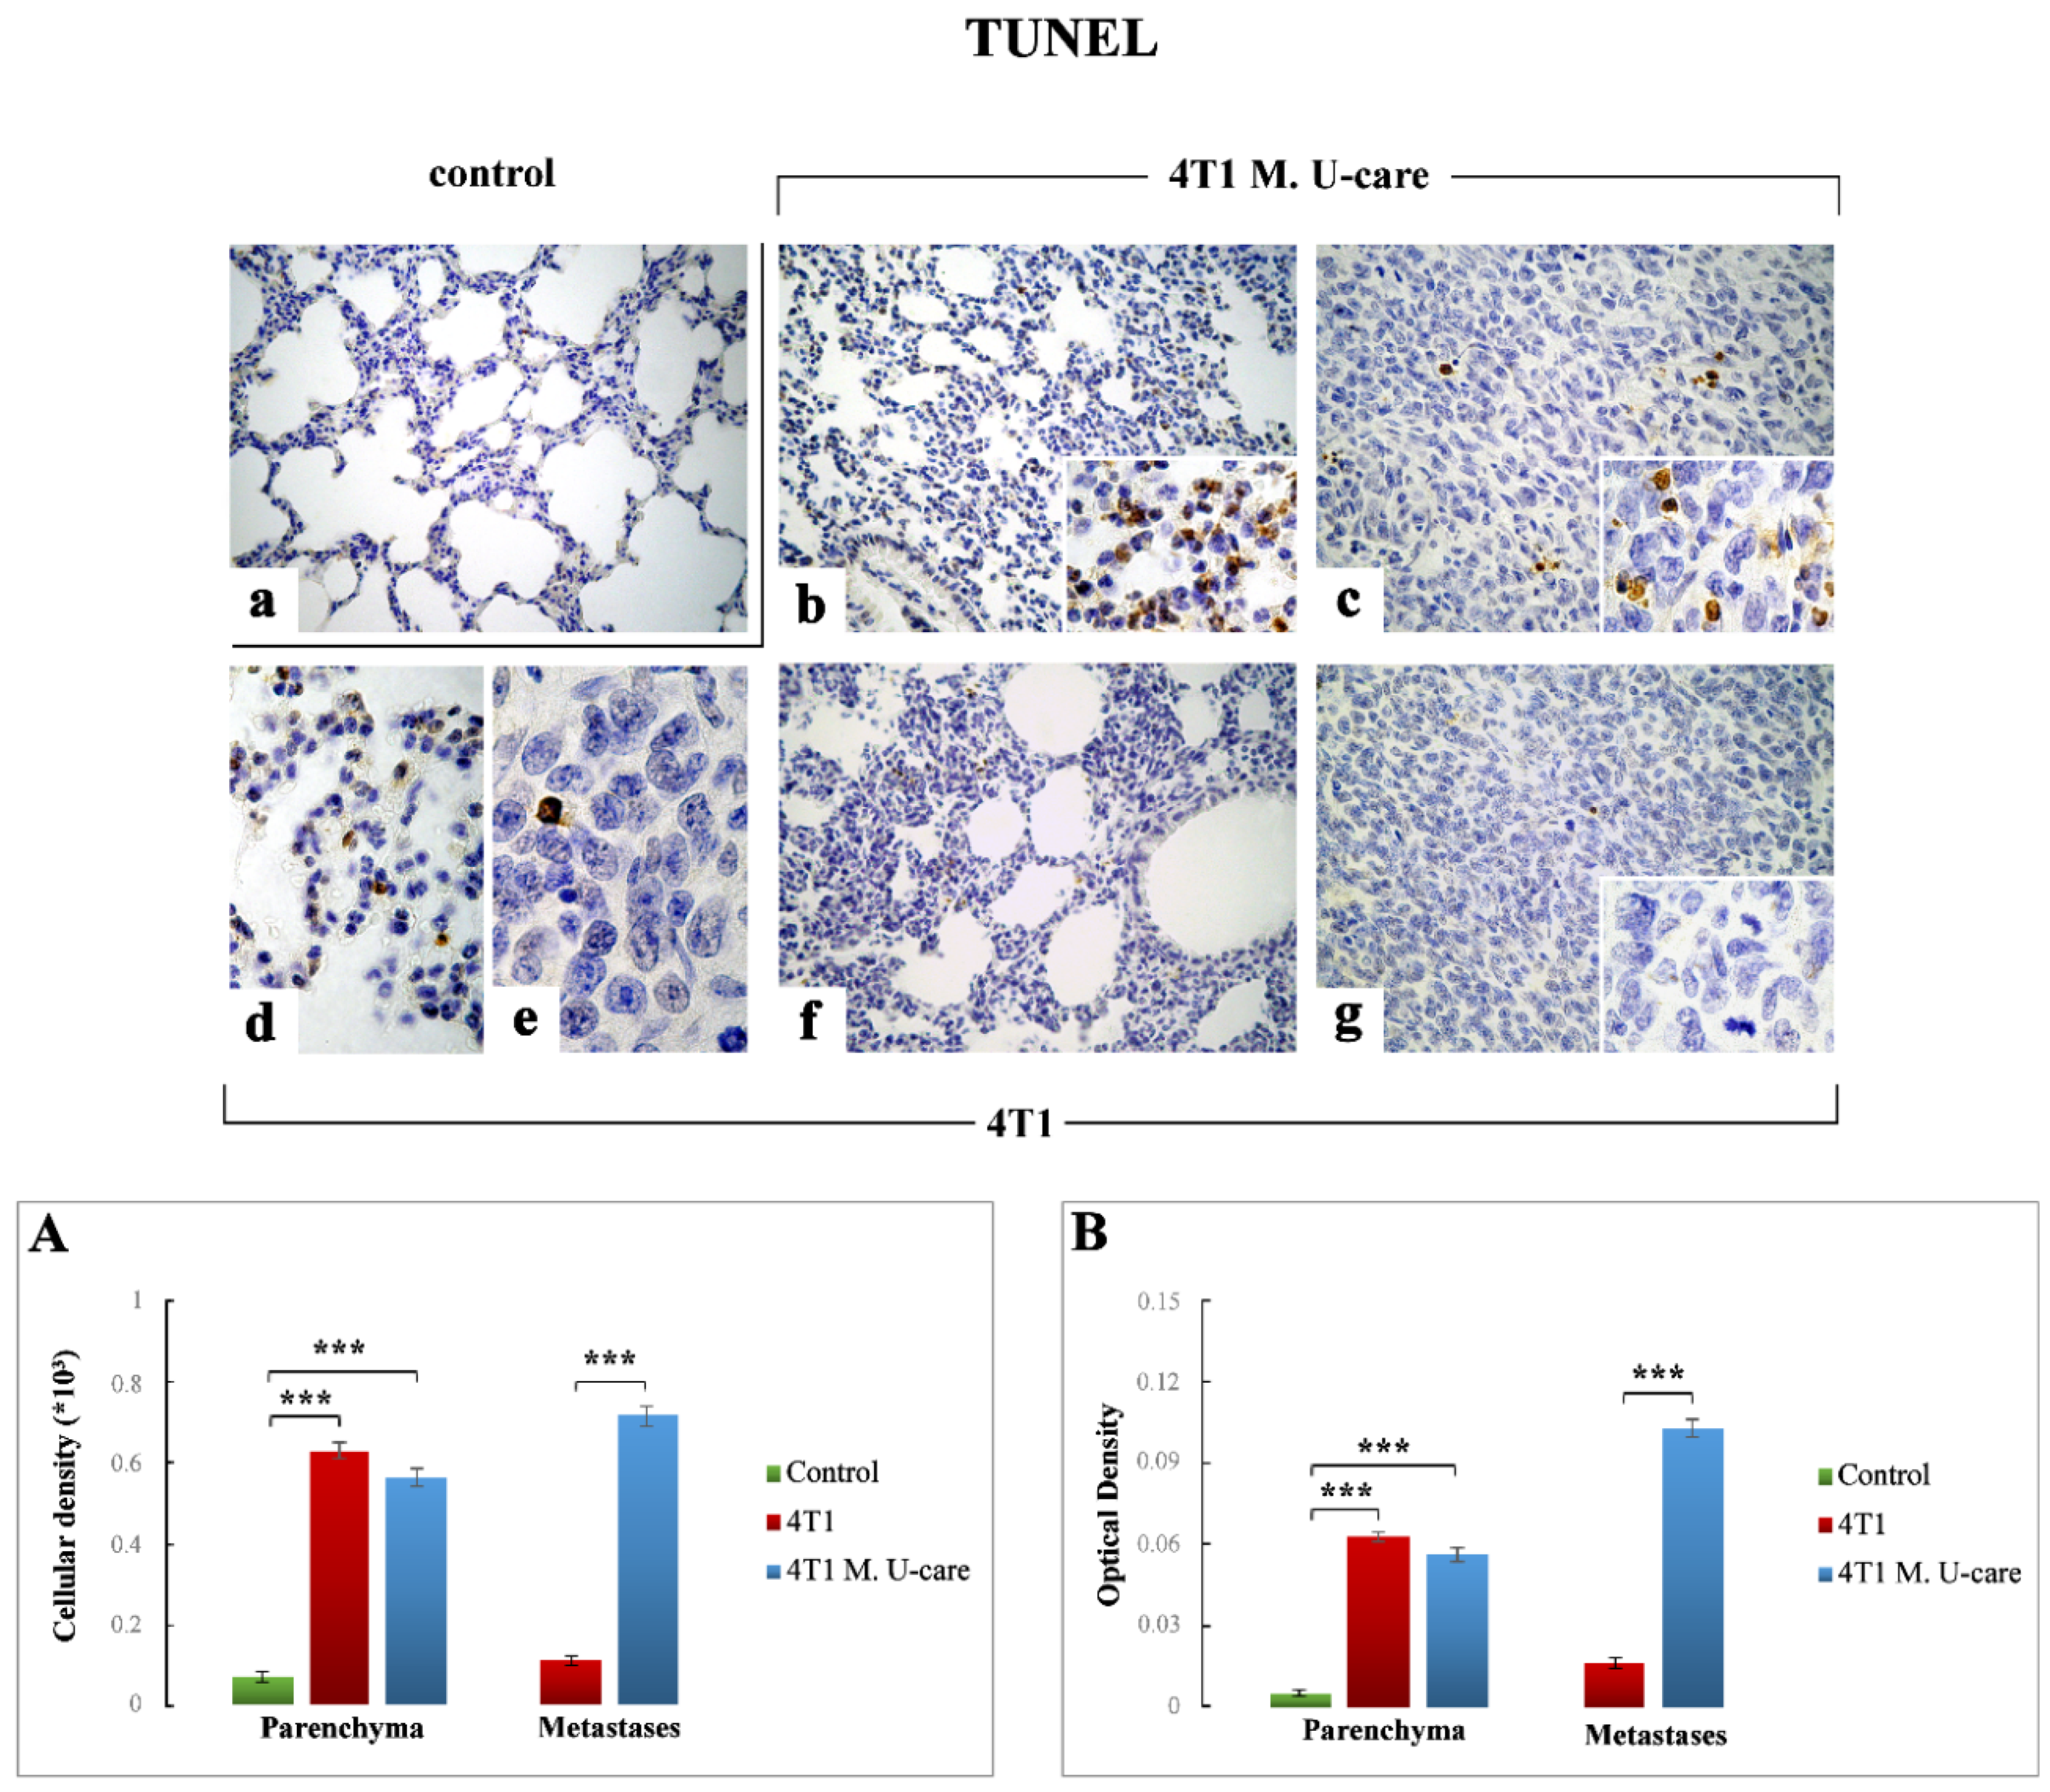 Molecules Free Full Text From A Medicinal Mushroom Blend A Direct Anticancer Effect On Triple Negative Breast Cancer A Preclinical Study On Lung Metastases Html